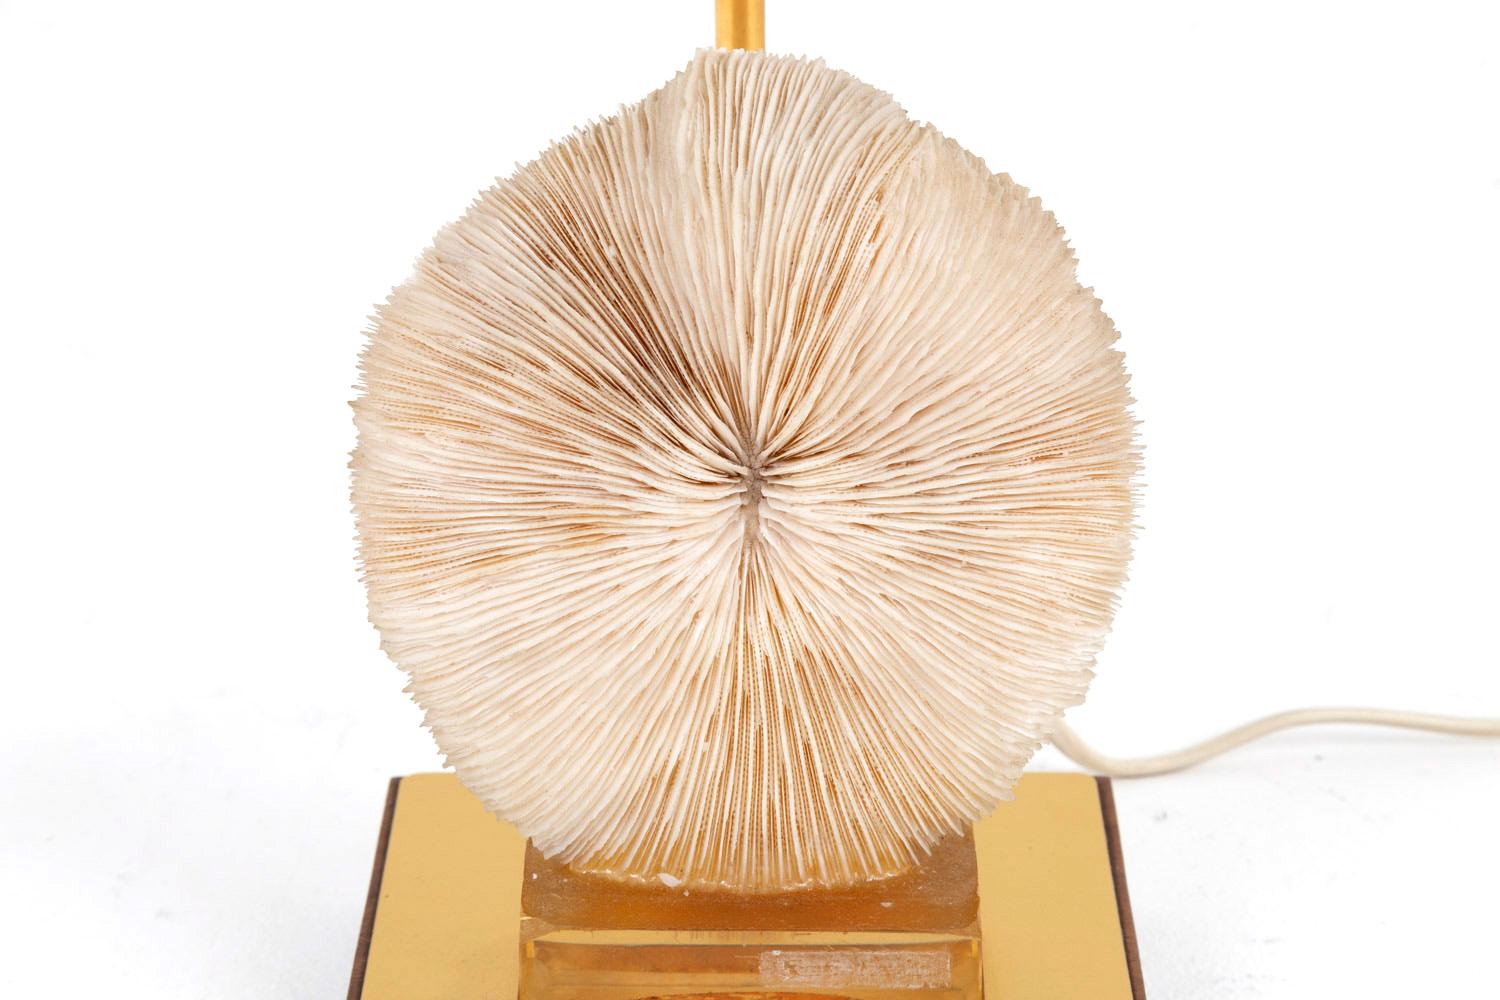 Lamp Fungia Fungites Coral and Gilt Brass, 1970s For Sale 1